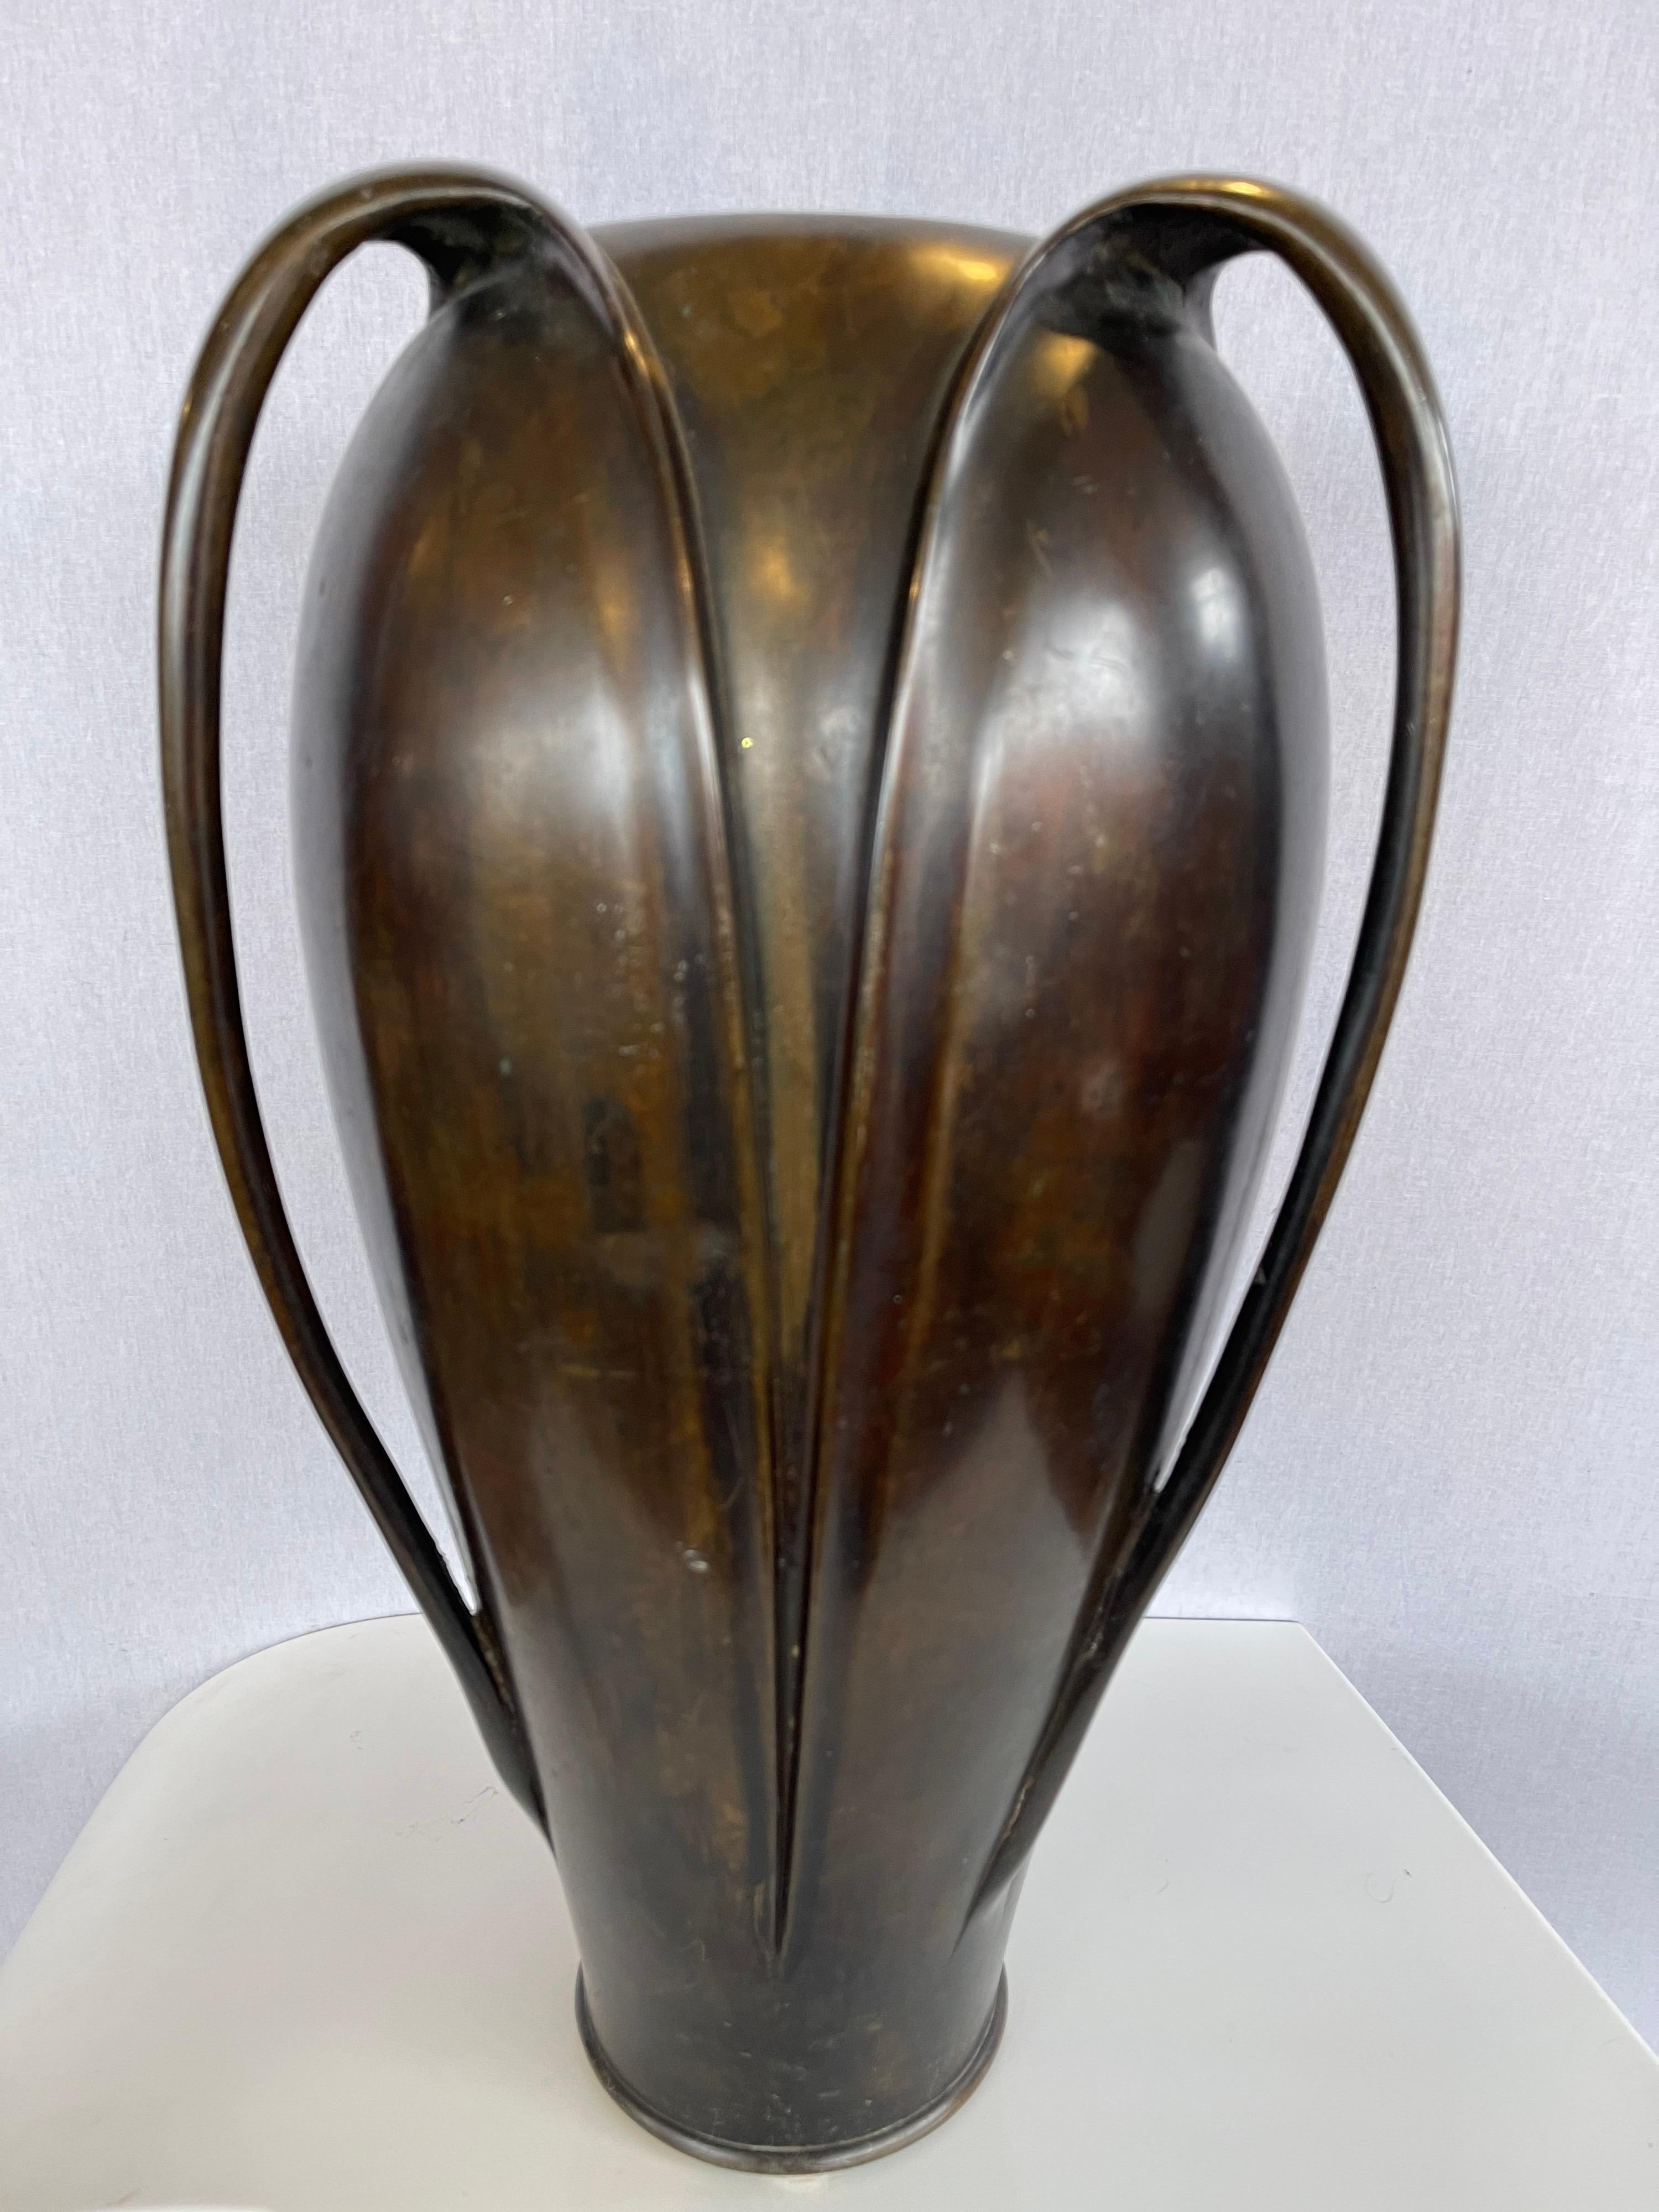 Stunning Japanese Art Nouveau patinated bronze tall vase with lines to die for and unusual tri-handled scheme. Circa early 20th Century.